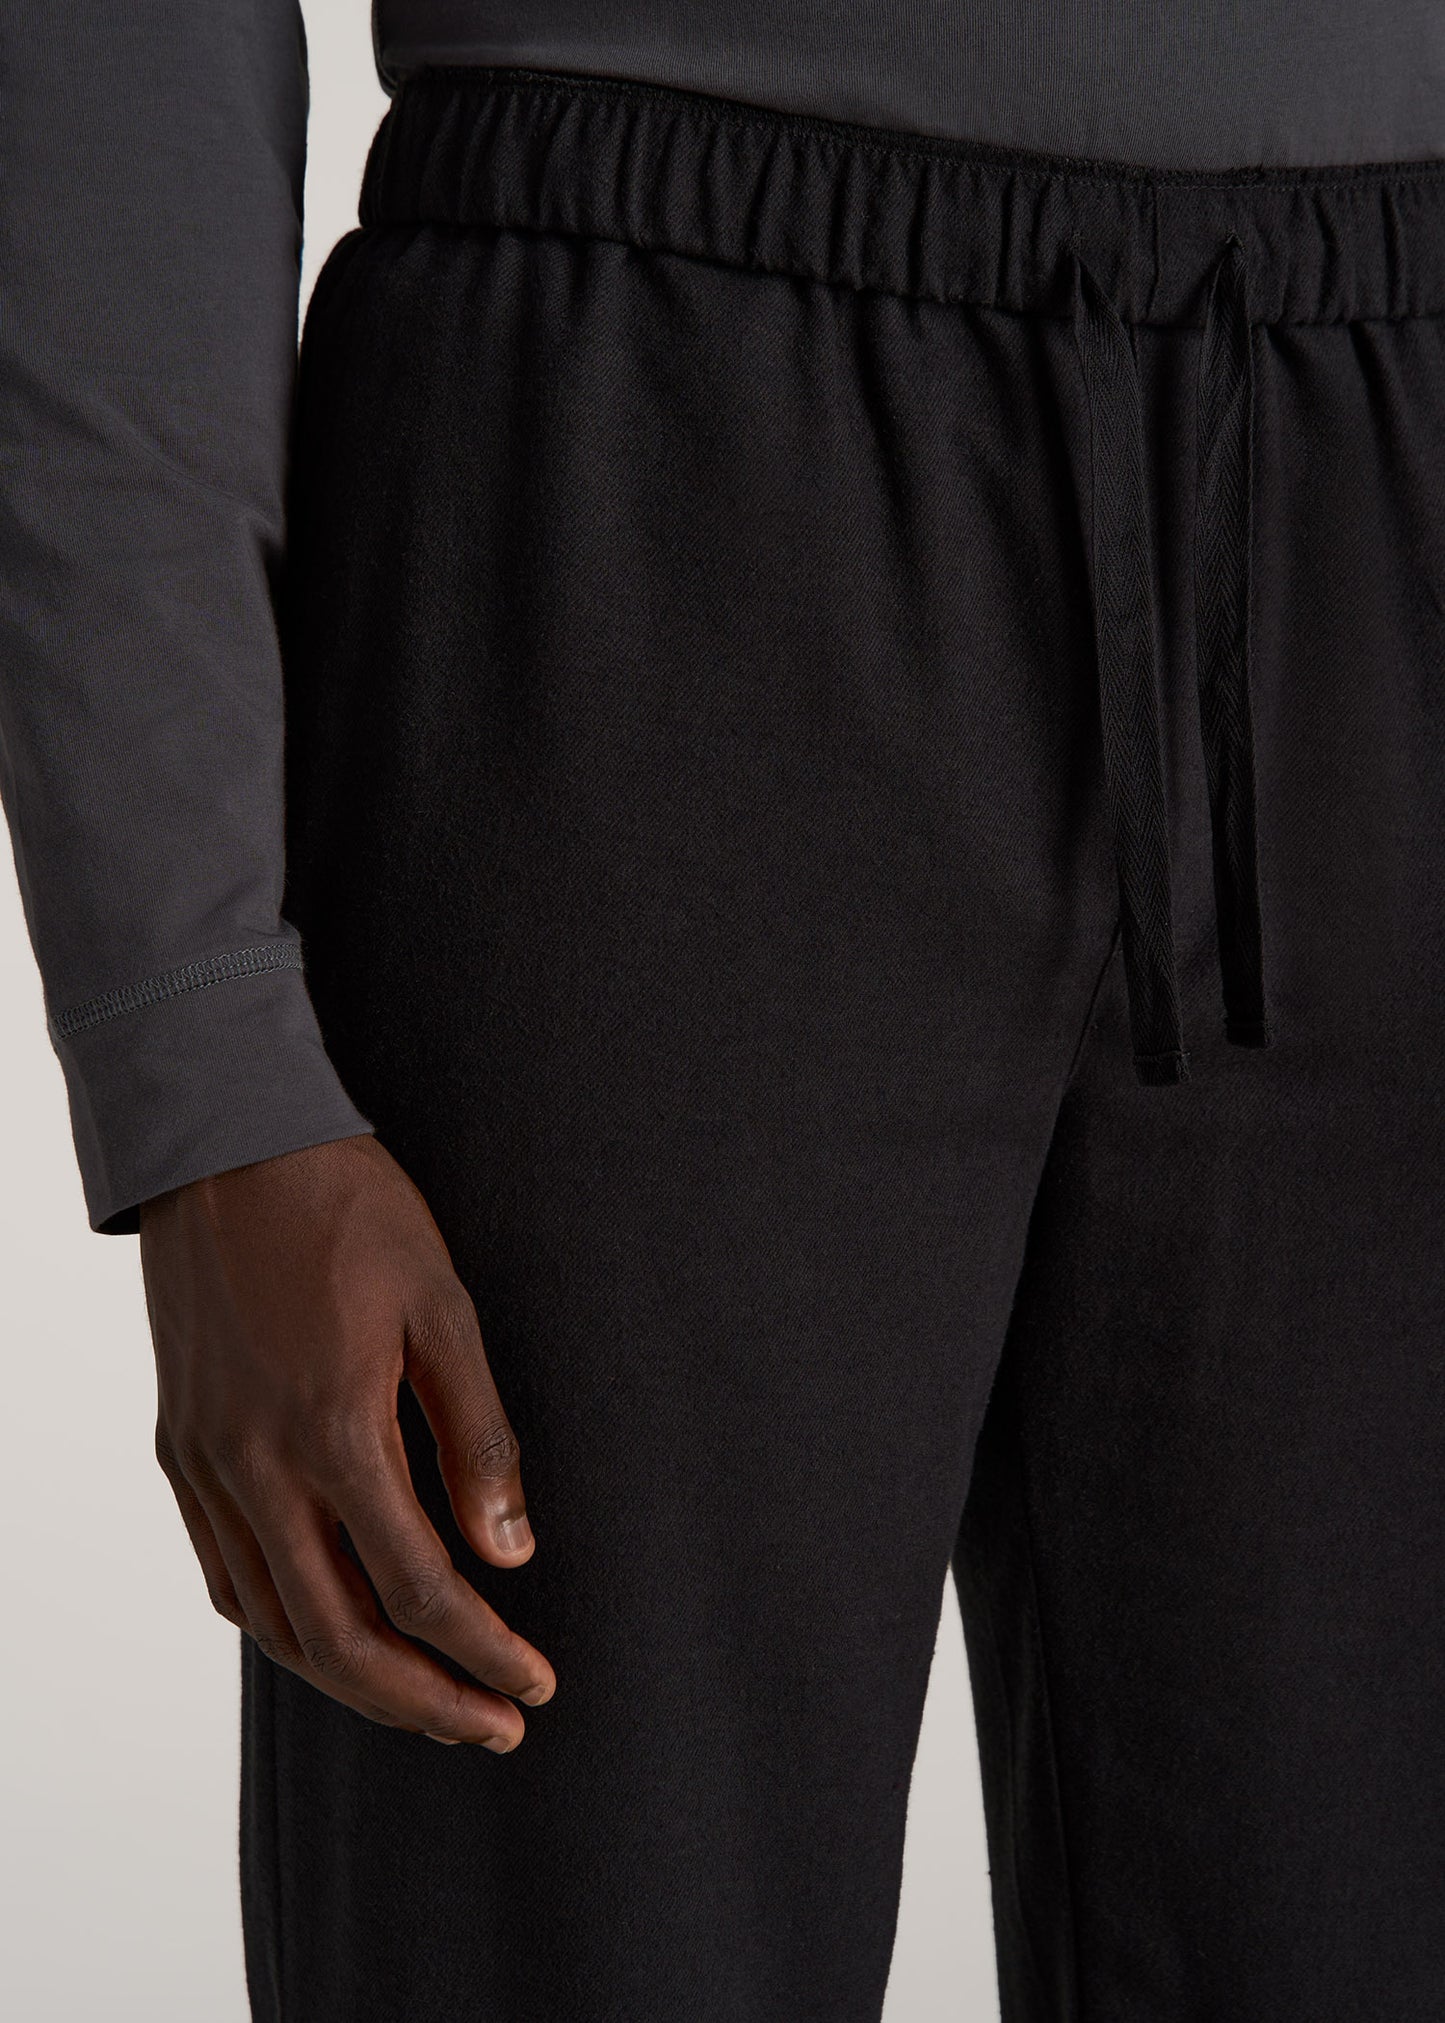 Pajama Pants for Tall Men in Charcoal Mix